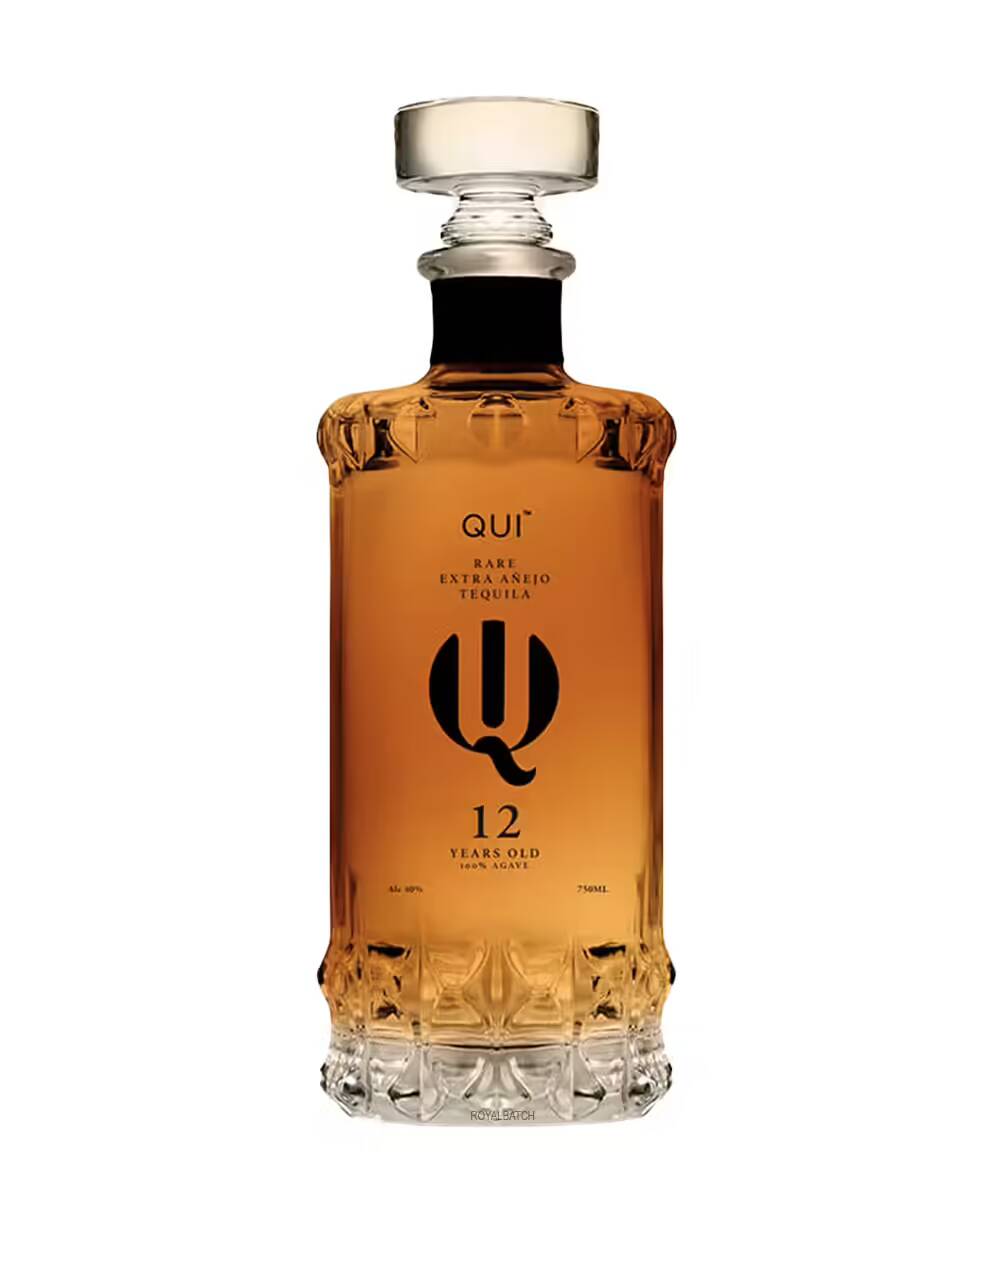 Qui Rare 12 Year Old Extra Anejo Tequila